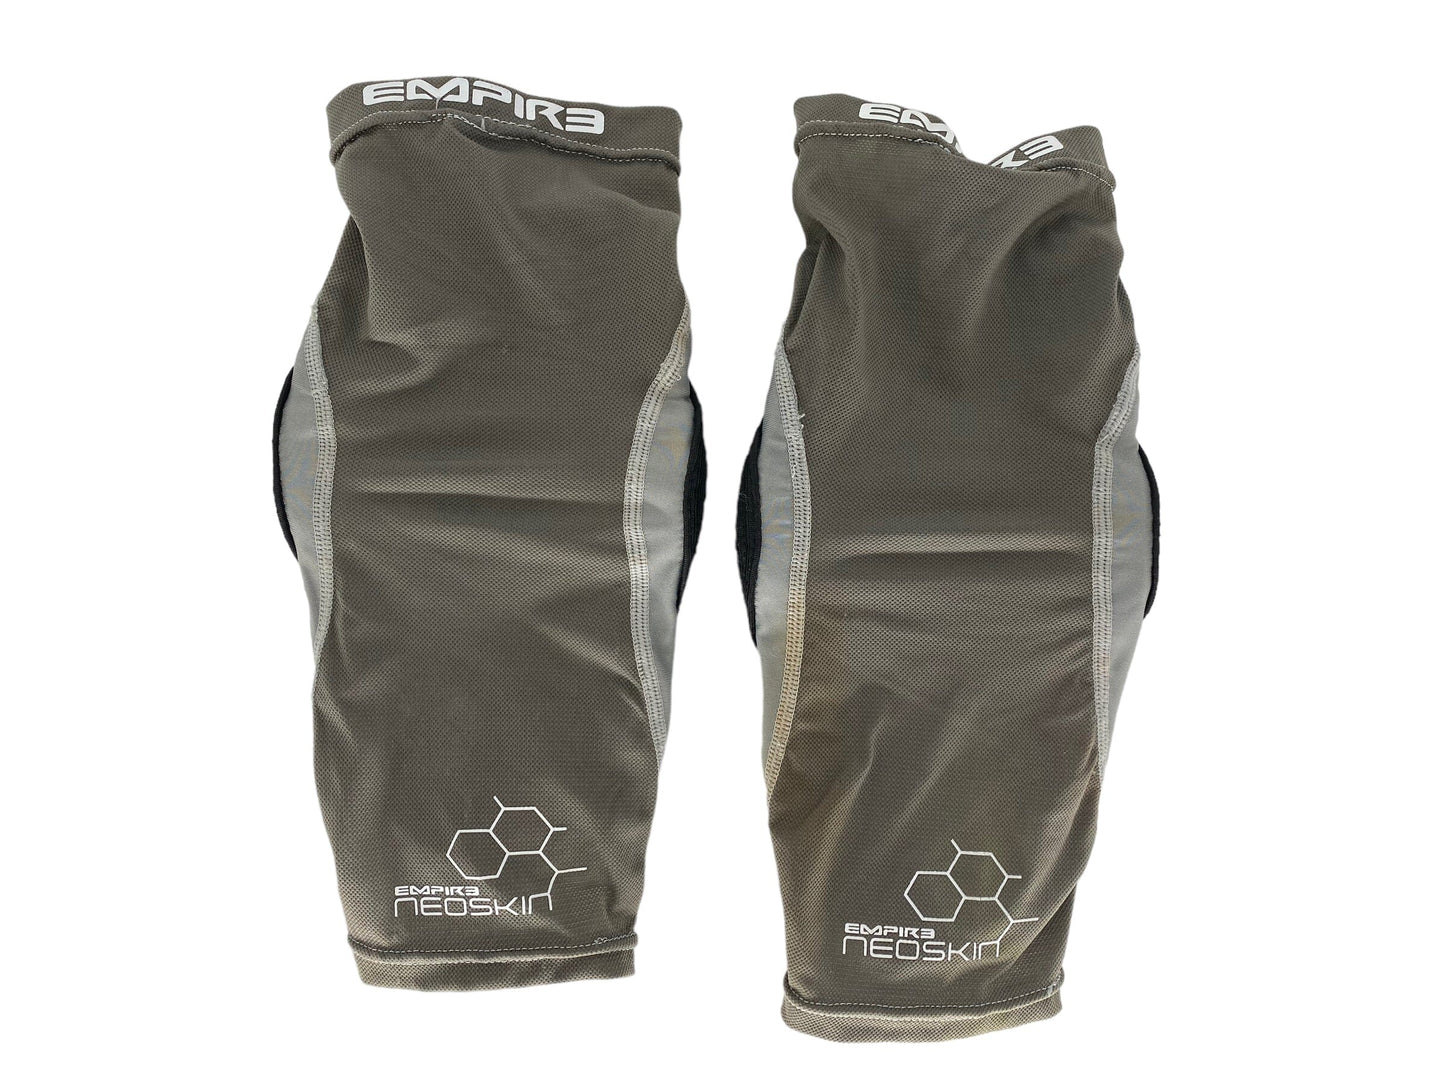 Used Empire Neoskin Knee Pads Size Medium Paintball Gun from CPXBrosPaintball Buy/Sell/Trade Paintball Markers, Paintball Hoppers, Paintball Masks, and Hormesis Headbands